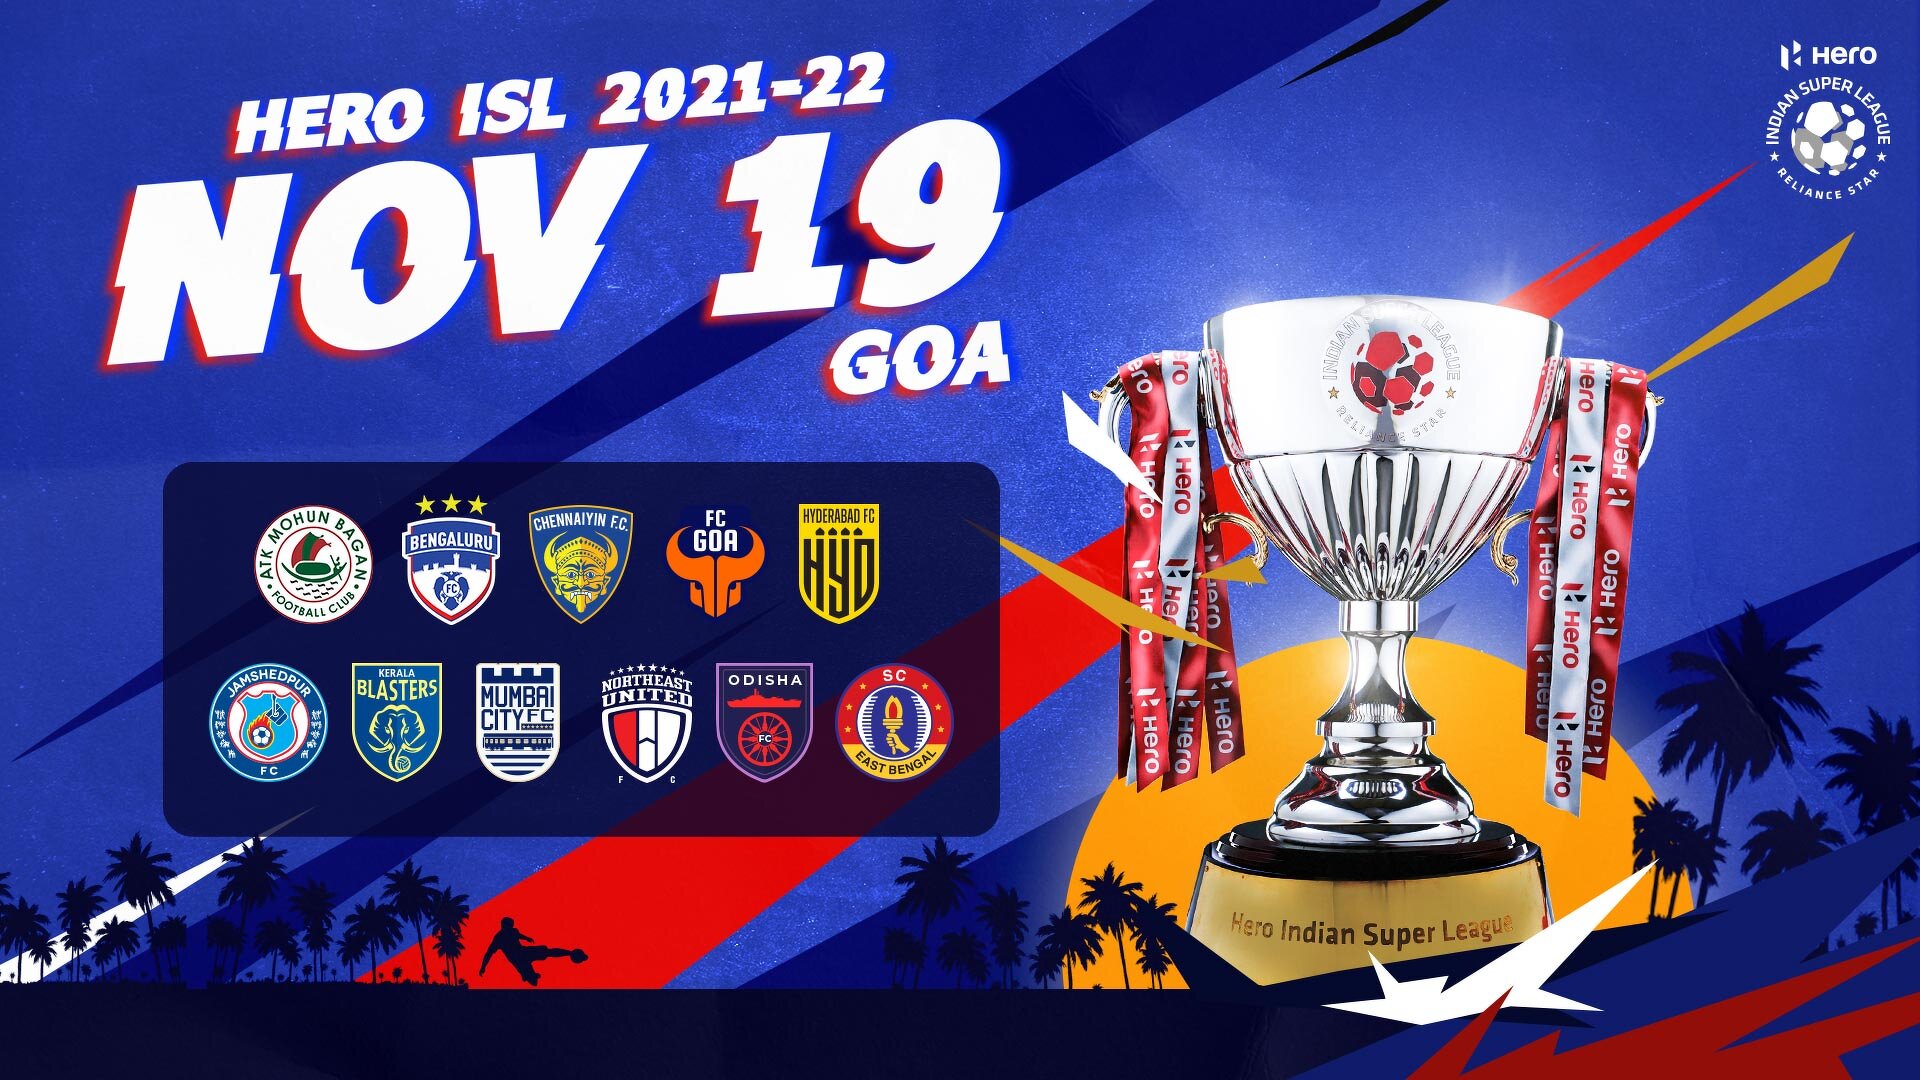 Isl 2022 Schedule Isl 2021-22: Full List Of Fixtures, Venues, Kick-Off Times, Telecast And  More